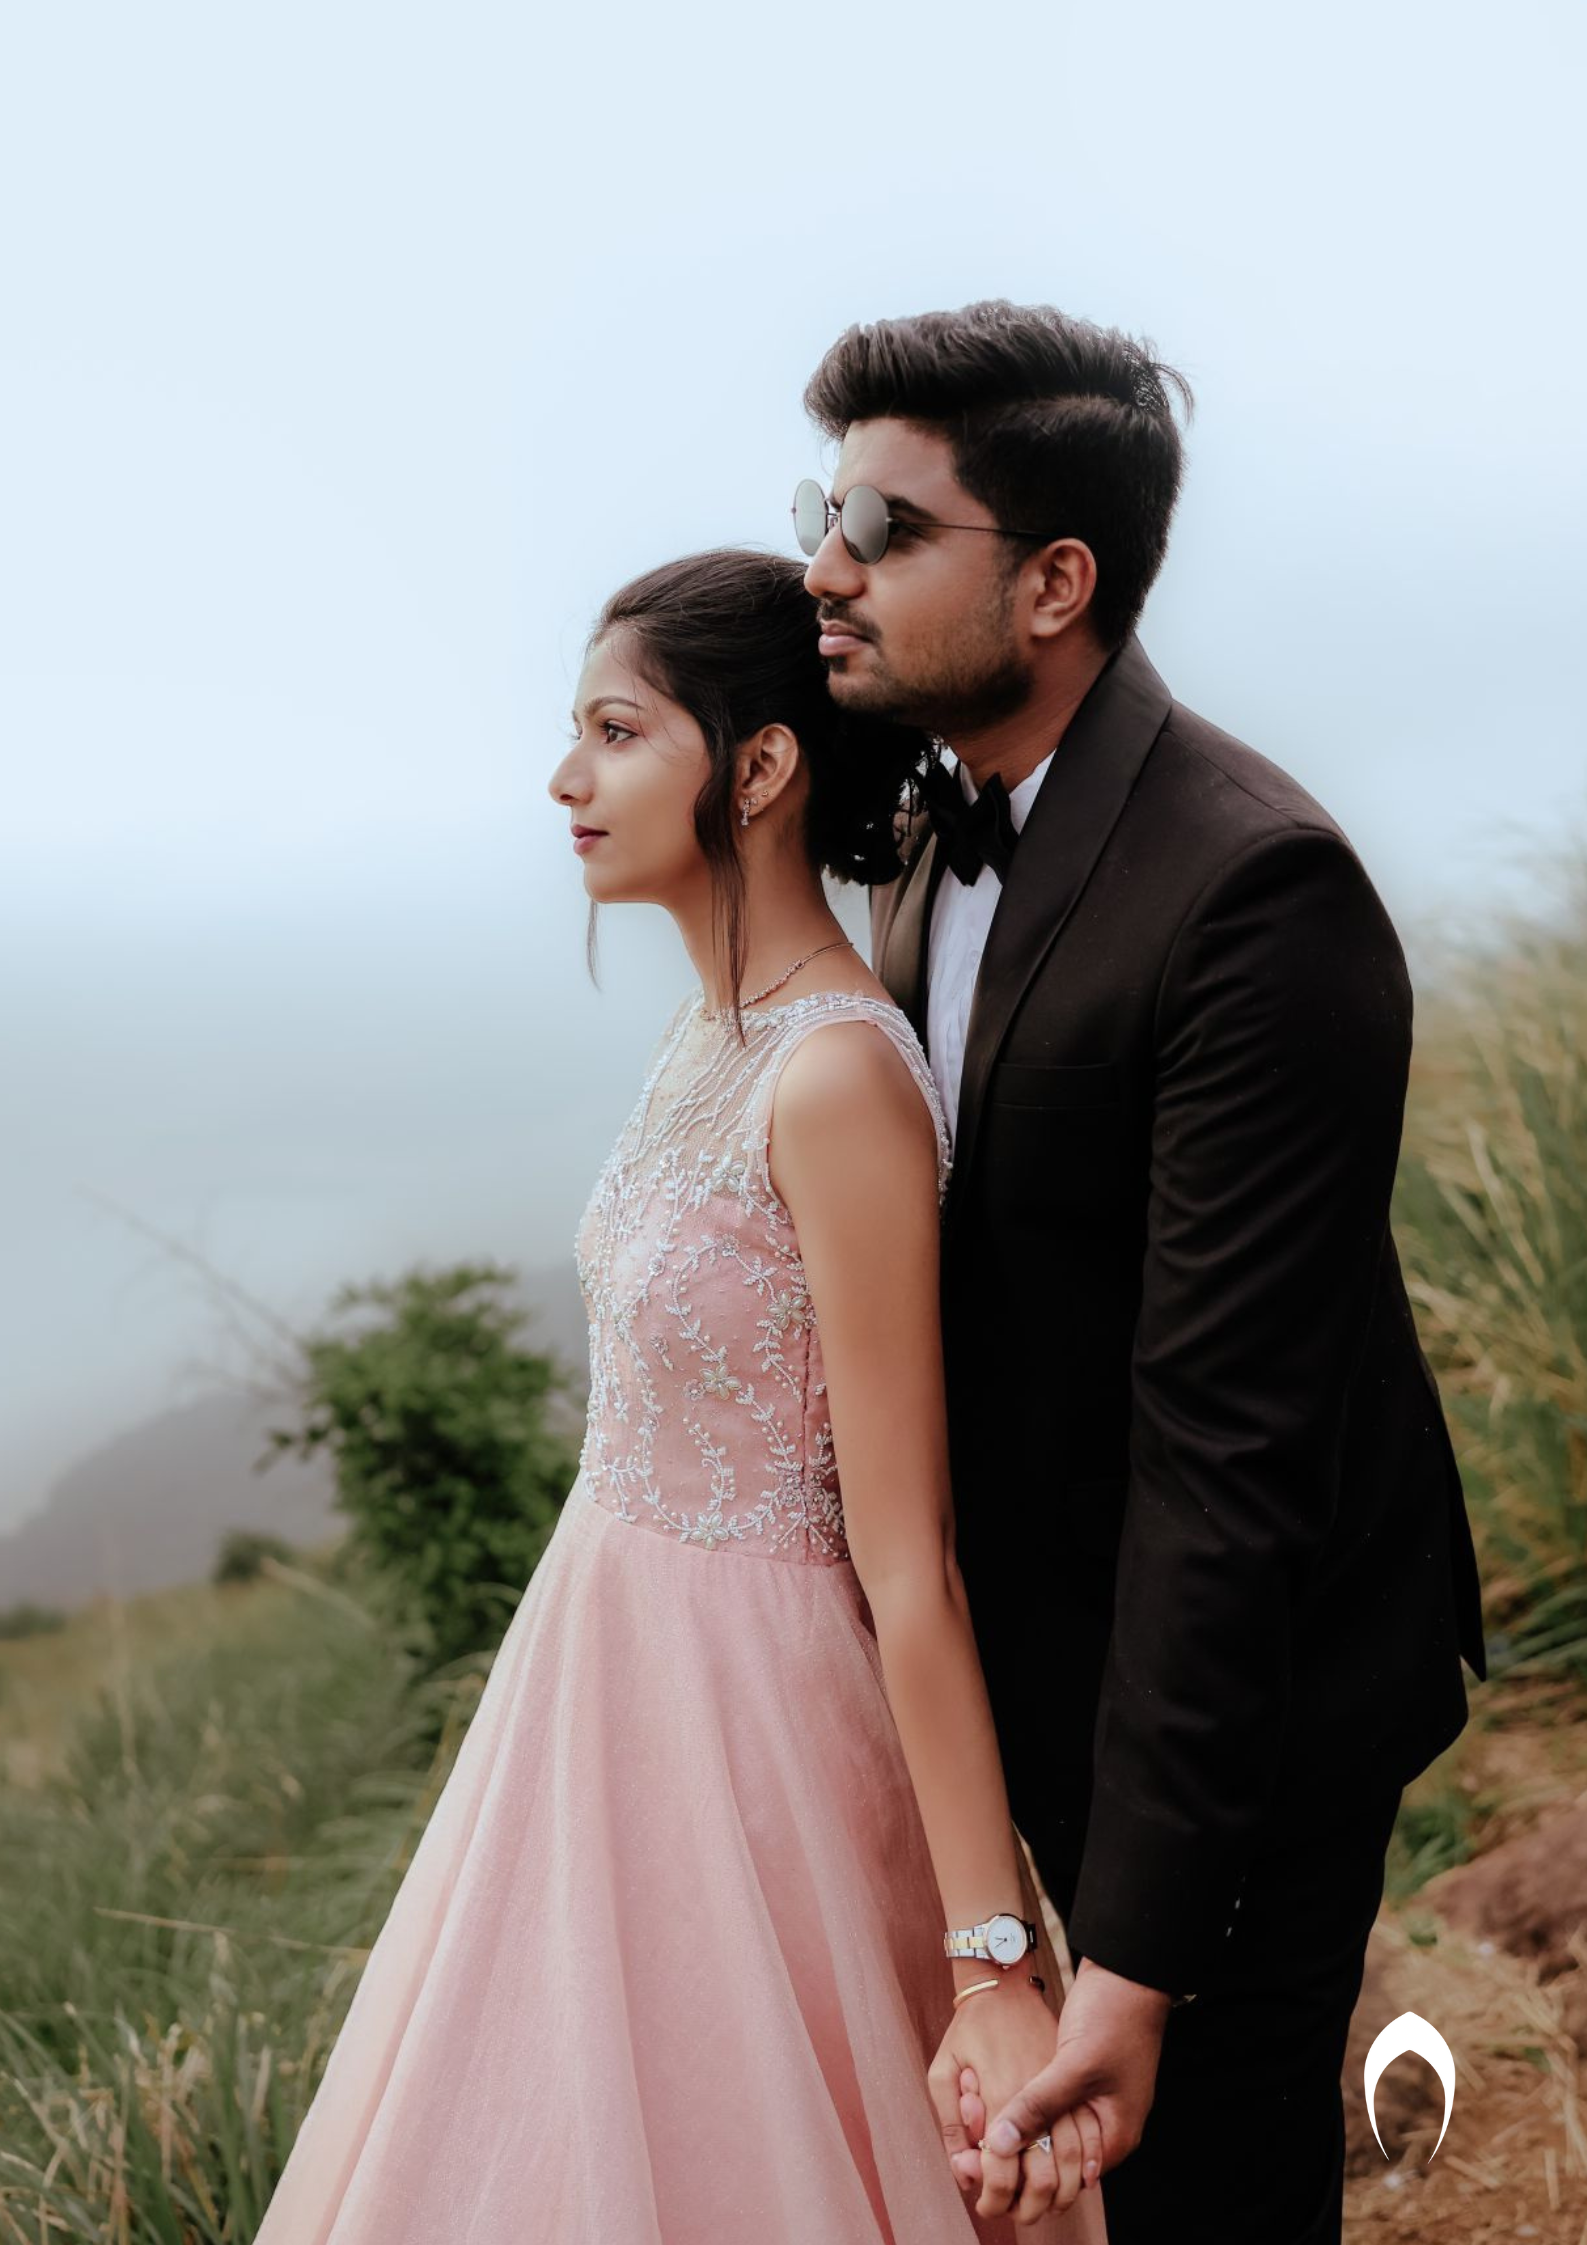 7 Stunning, Timeless Couple Poses for Your Wedding Album